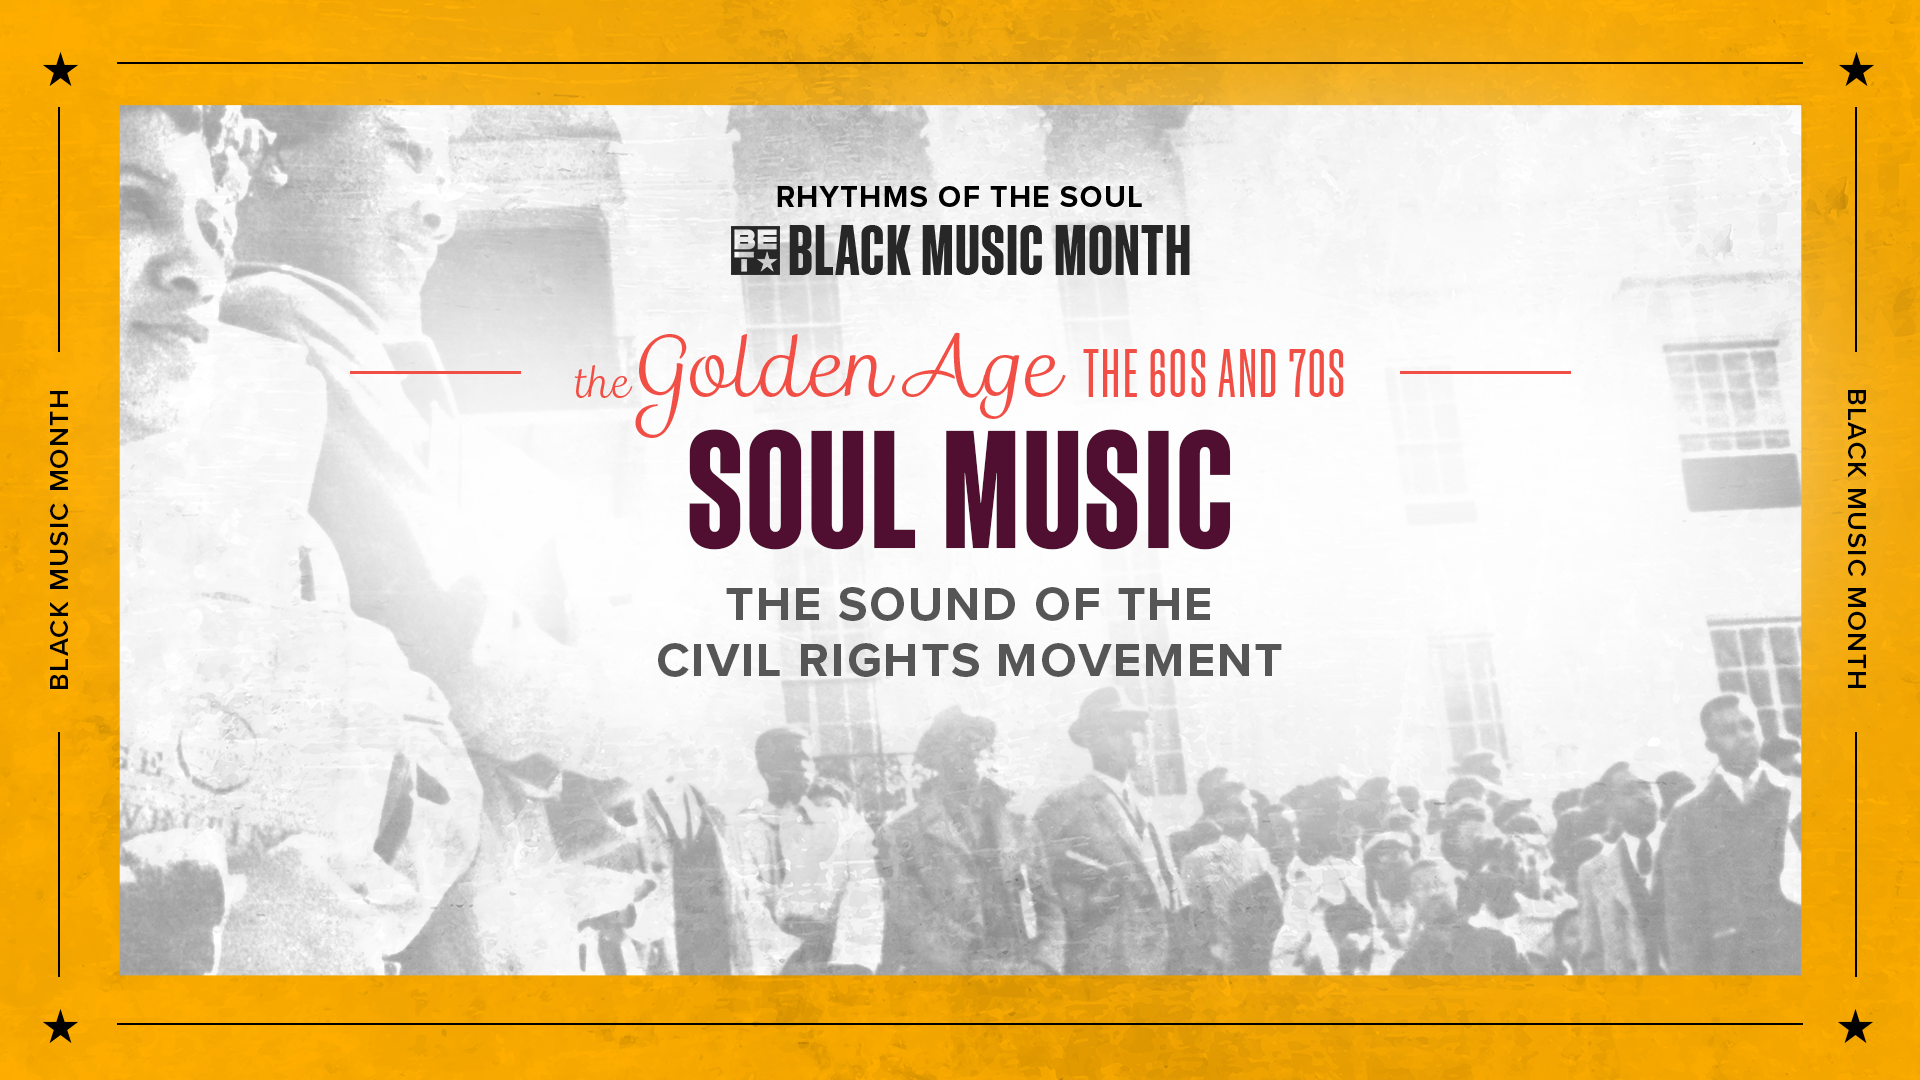 History of Soul Music